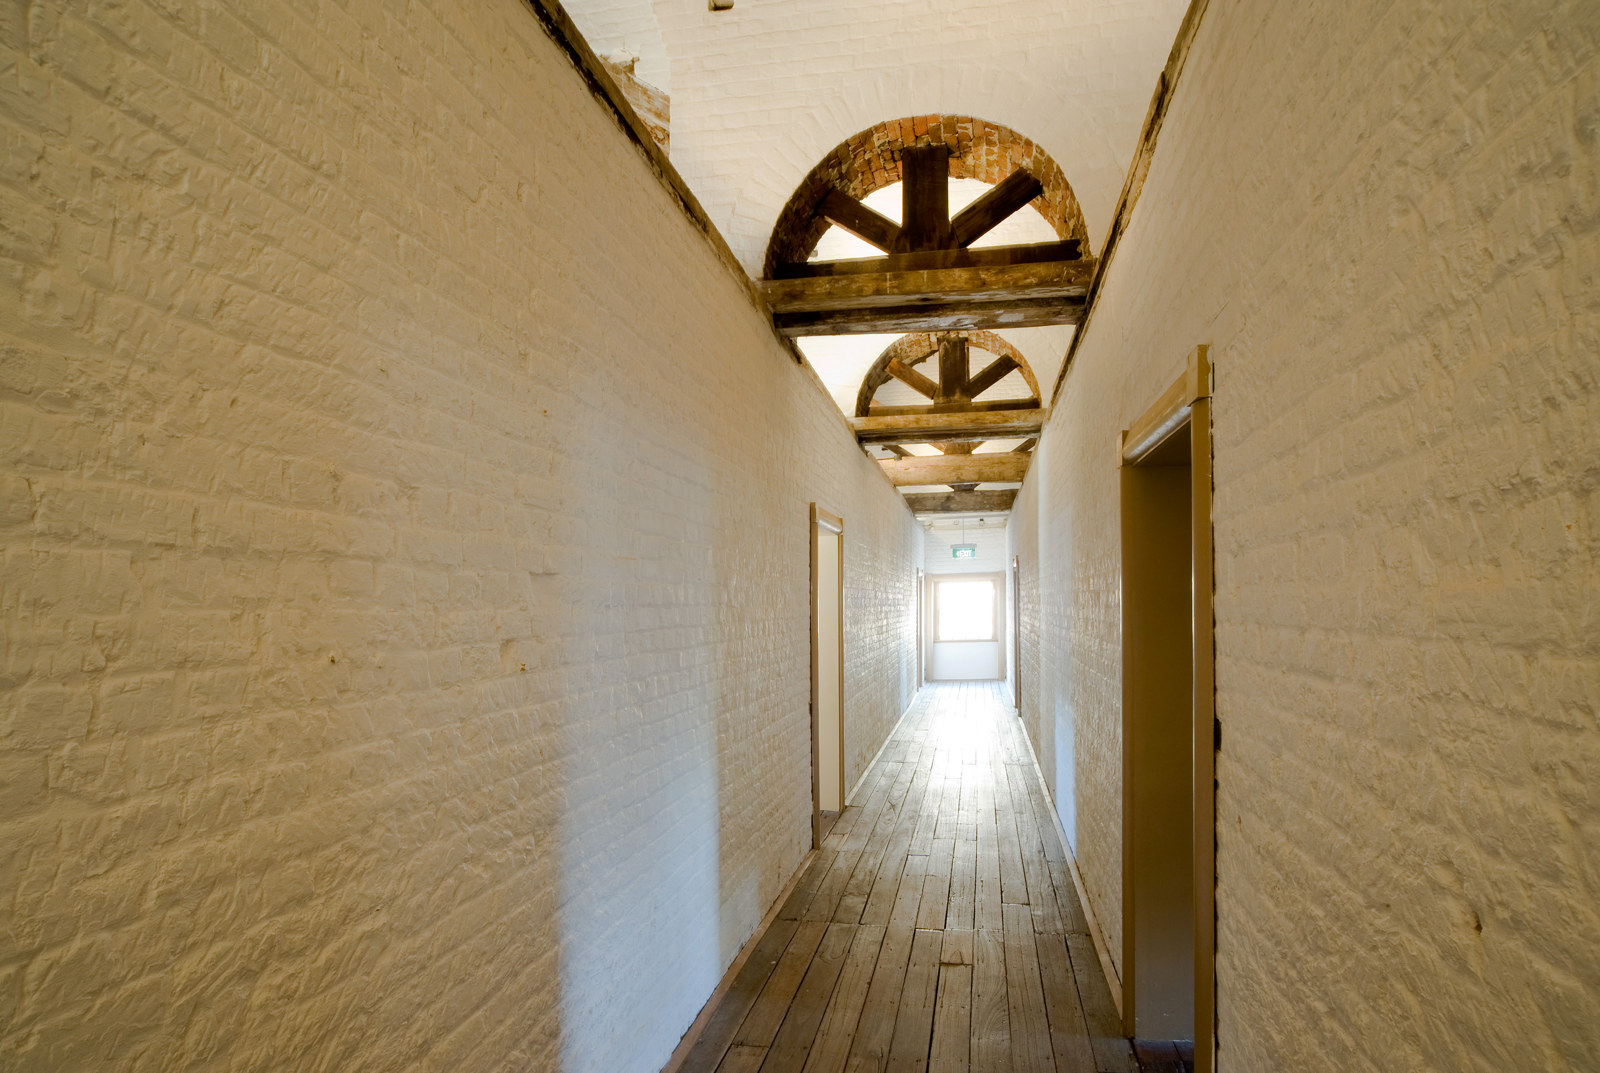 View along interior corridor towards sunlit window, with wooden ceiling arches visible.